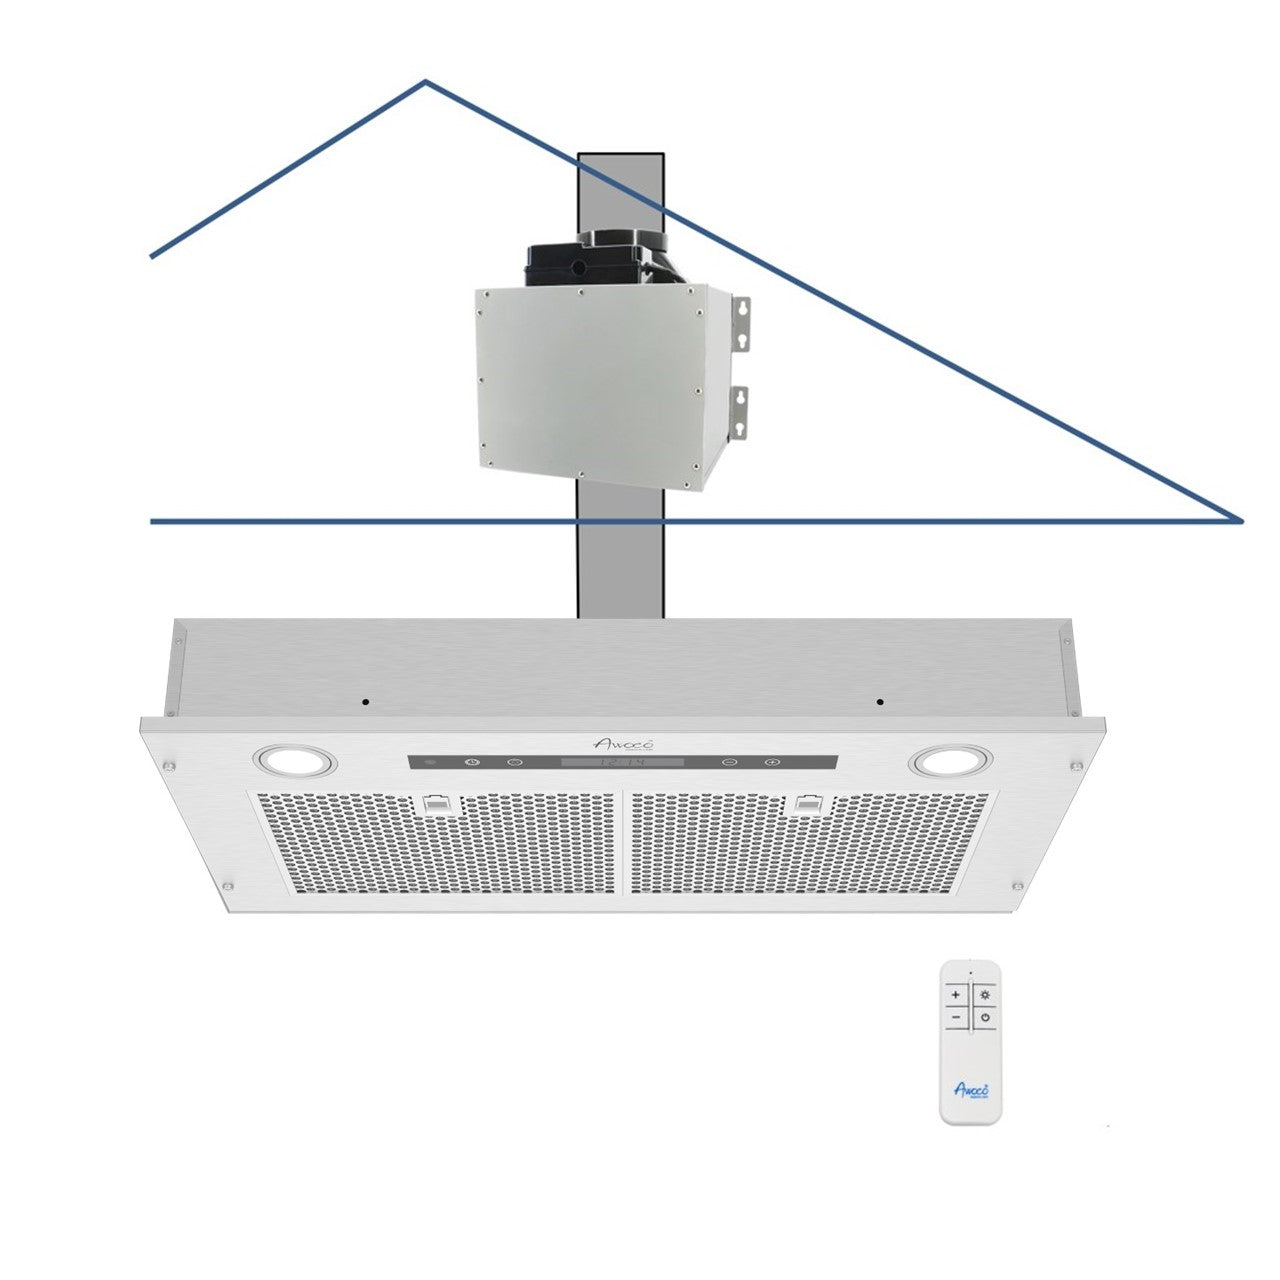 Awoco RH-IT06-R30 14-1/2”D Super Quiet Split Insert Ceiling Mount Stainless Steel Range Hood, 4-Speed, 800 CFM, LED Lights with 6” Blower & Remote Control (30"W 6" Vent)